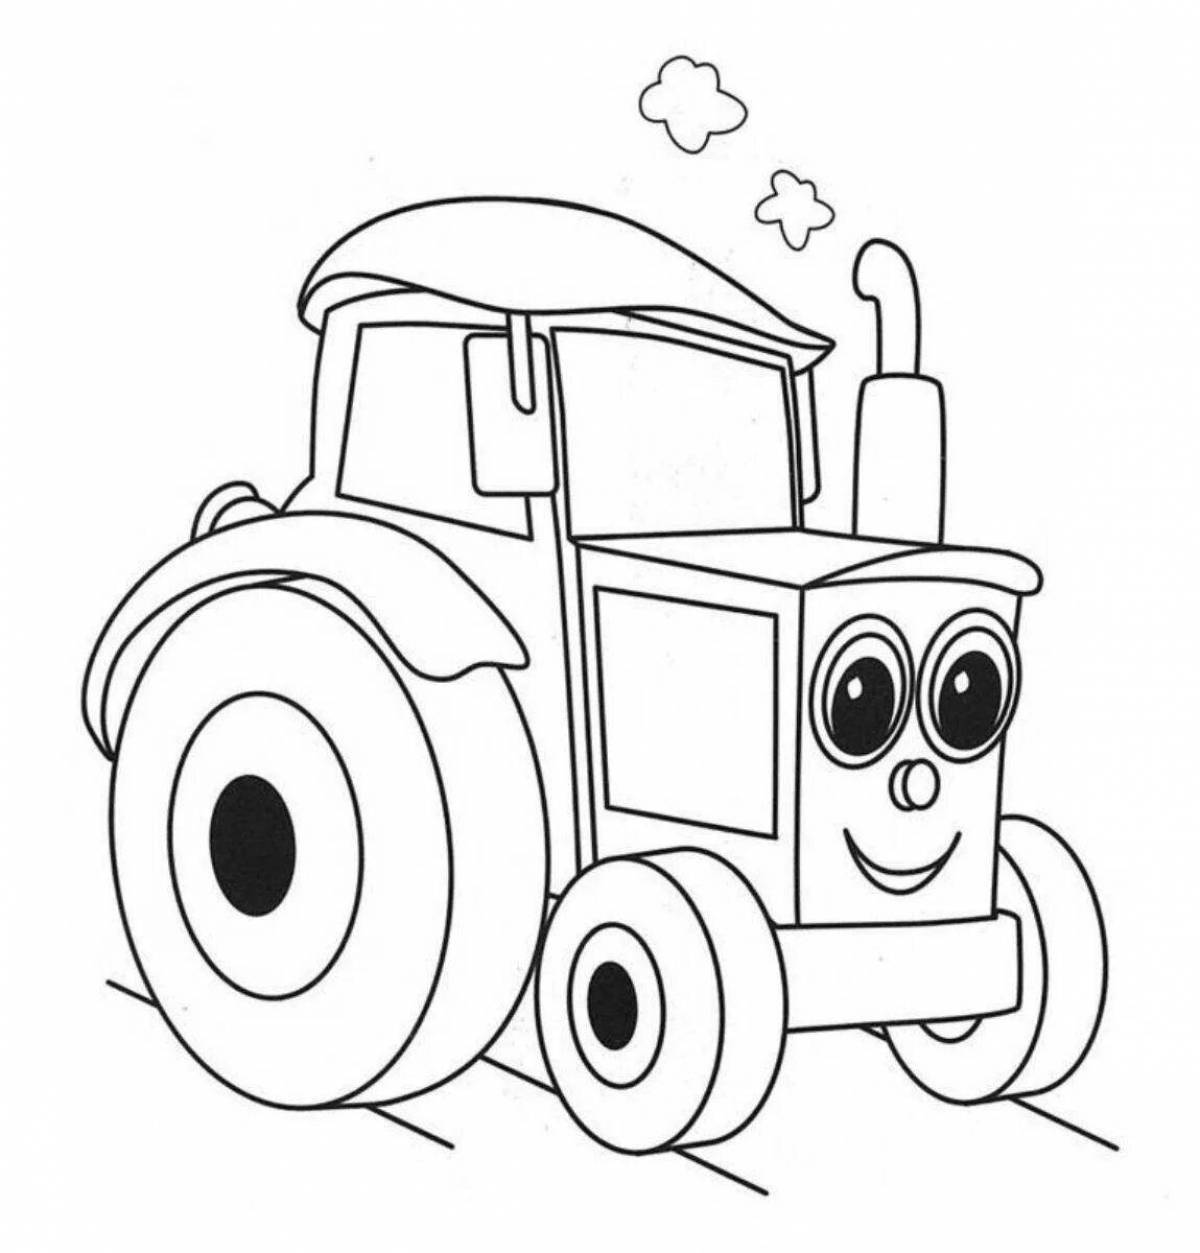 Coloring pages dazzling cars for boys 4 years old